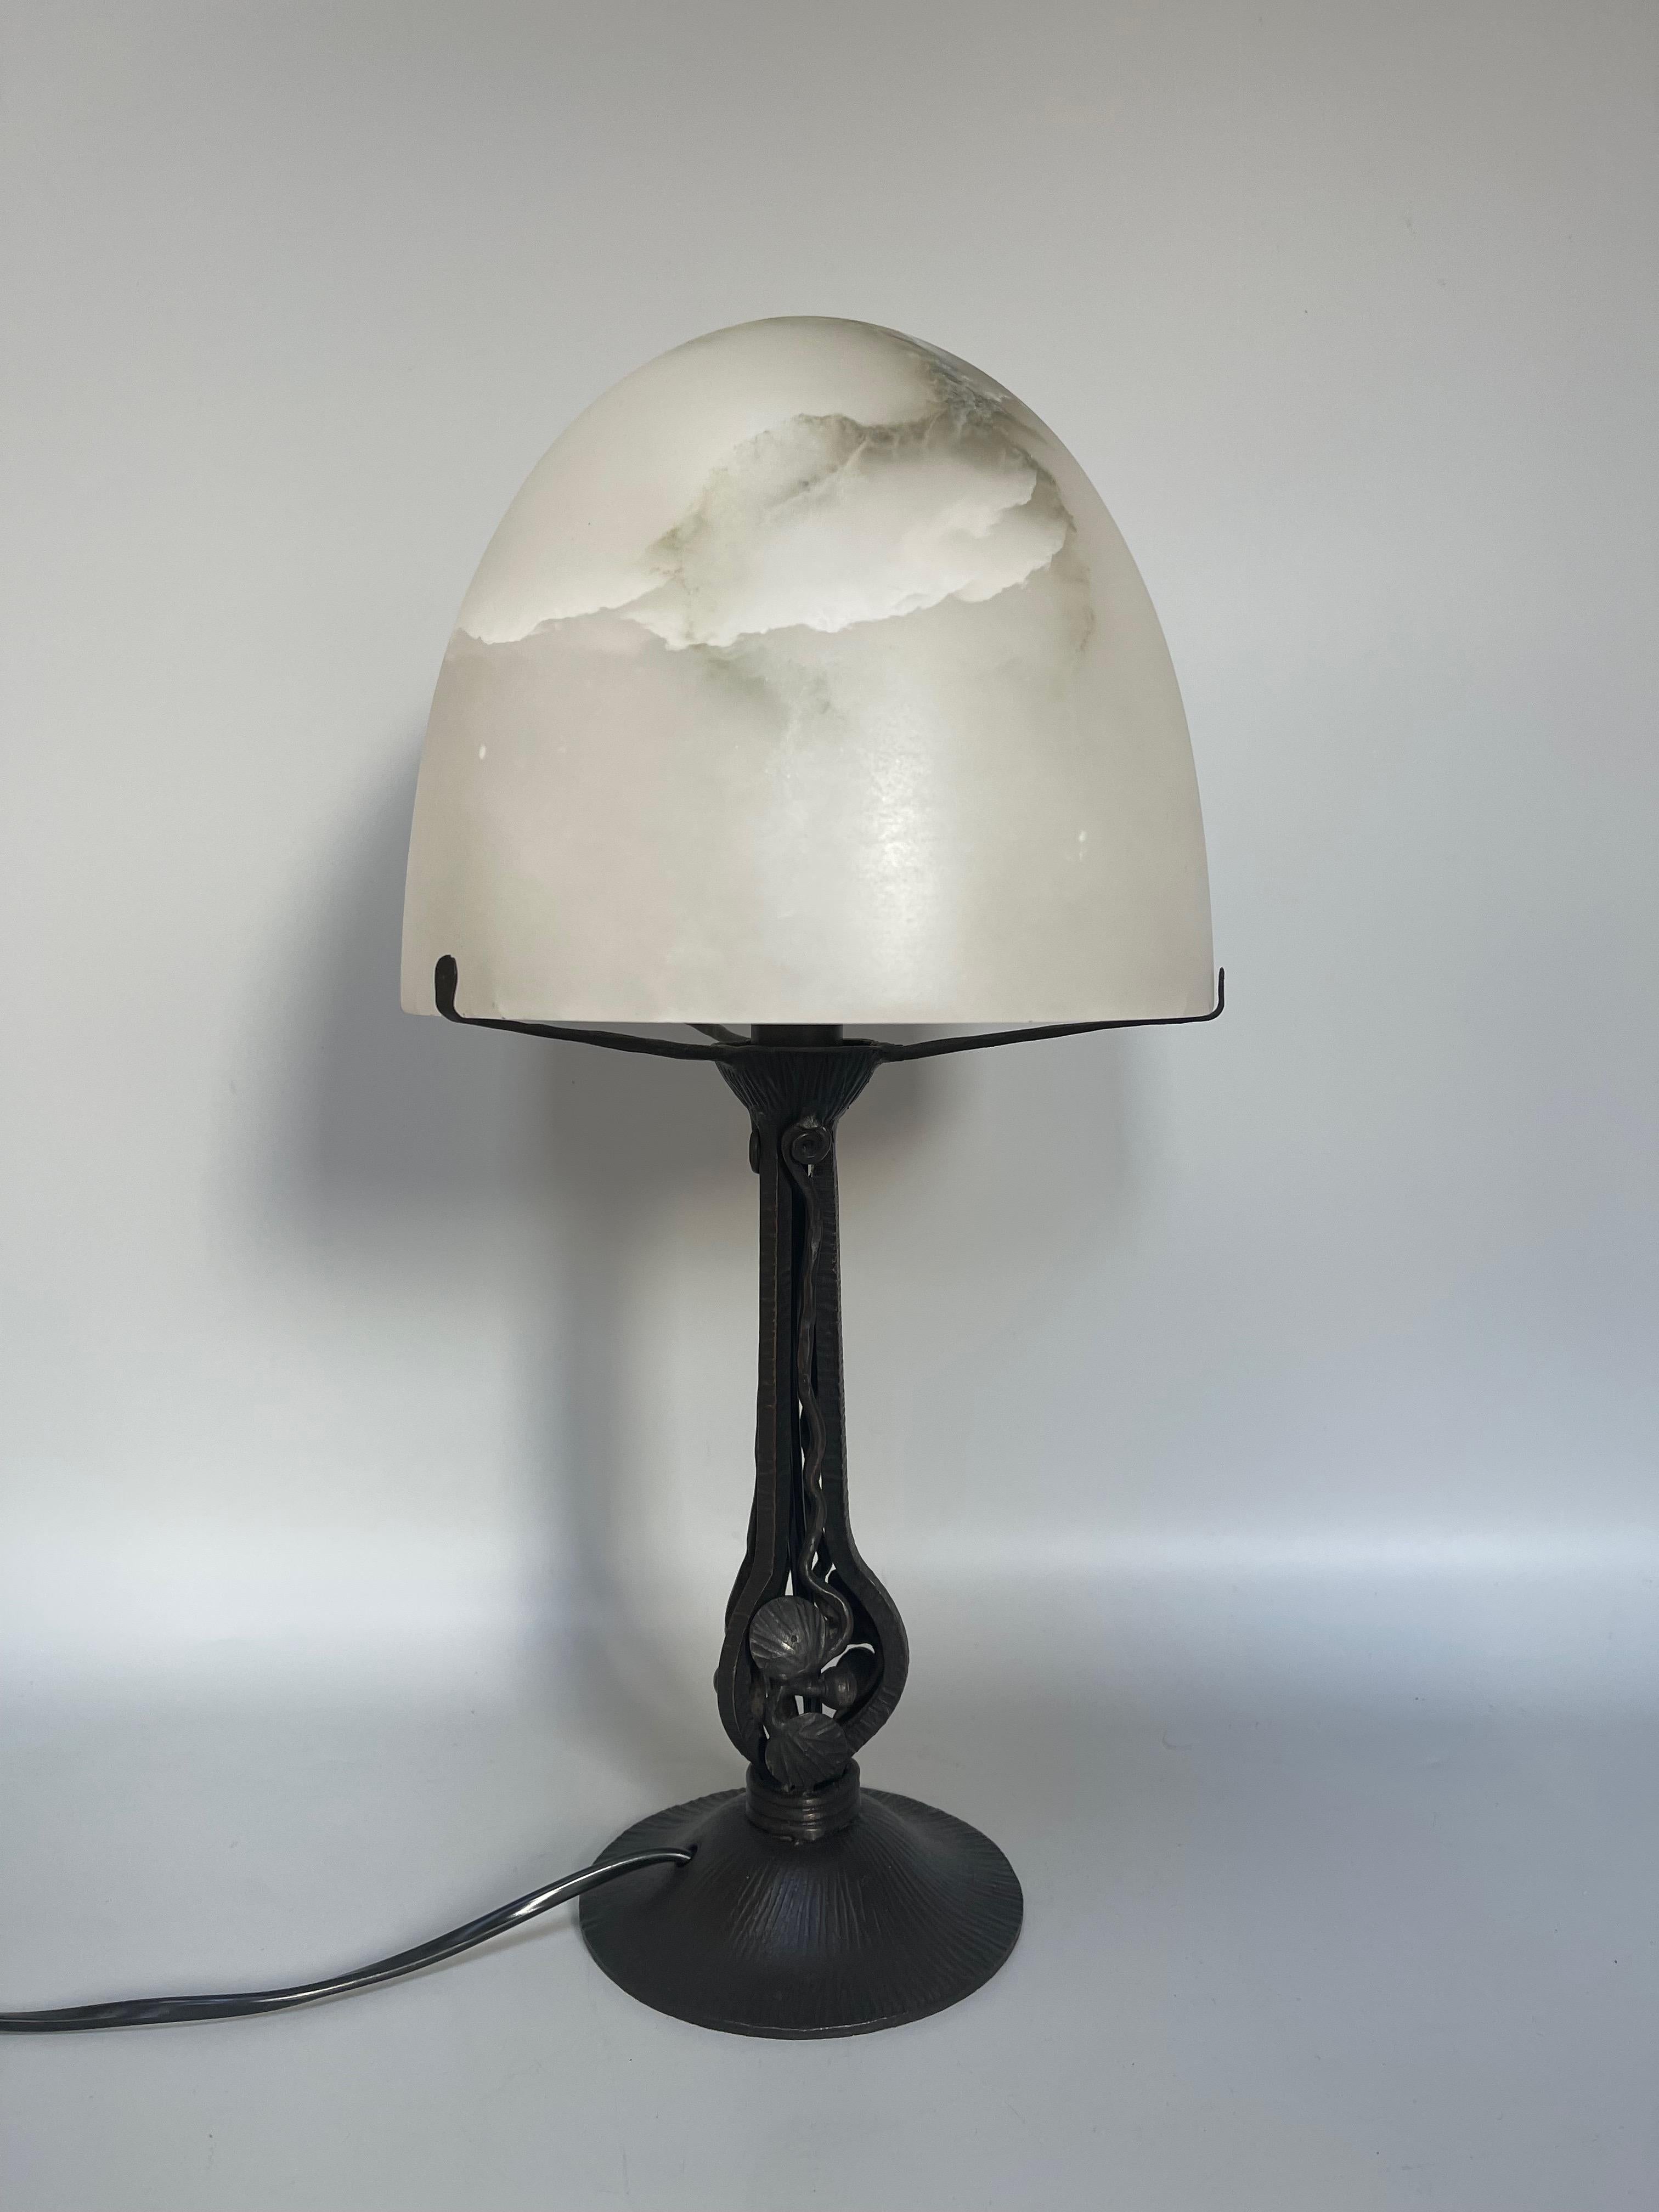 20th Century Art Deco Wrought Iron And Alabaster Lamp